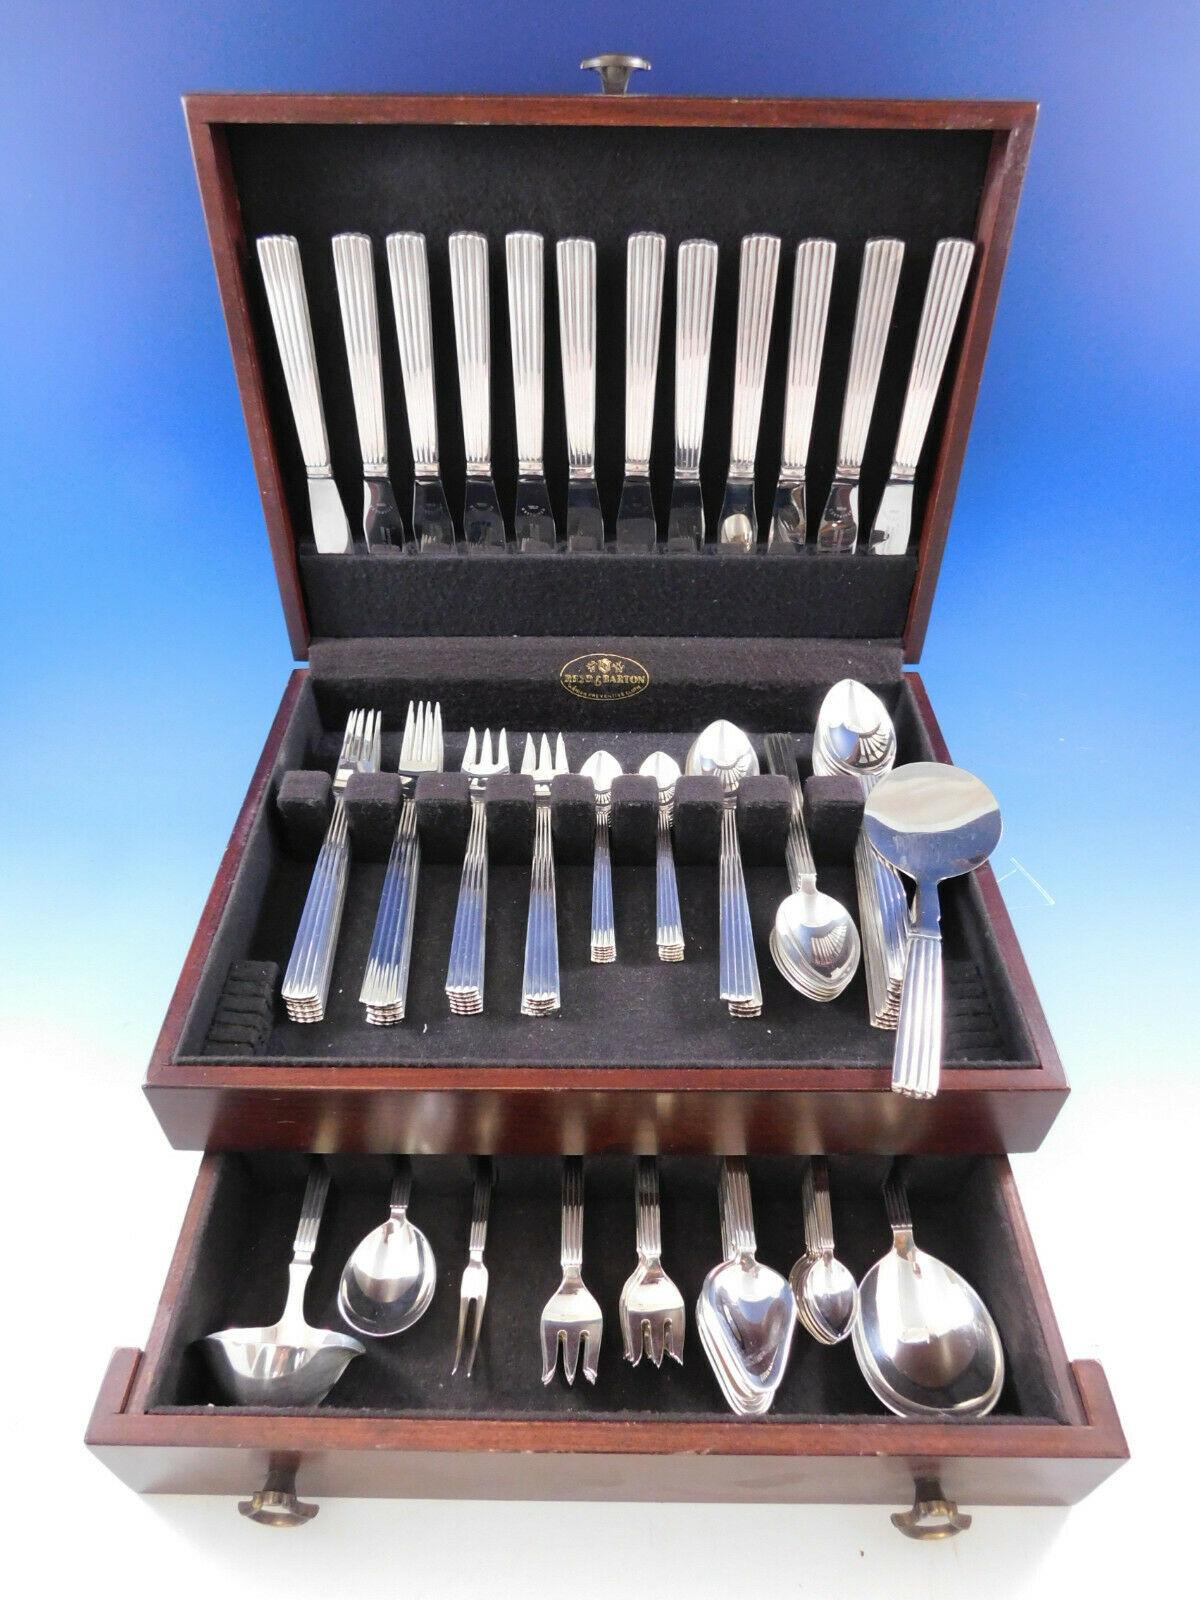 Exceptional dinner size Bernadotte by Georg Jensen Sterling silver flatware set, 113 pieces.This set includes:

12 dinner knives, long handle, 8 3/4